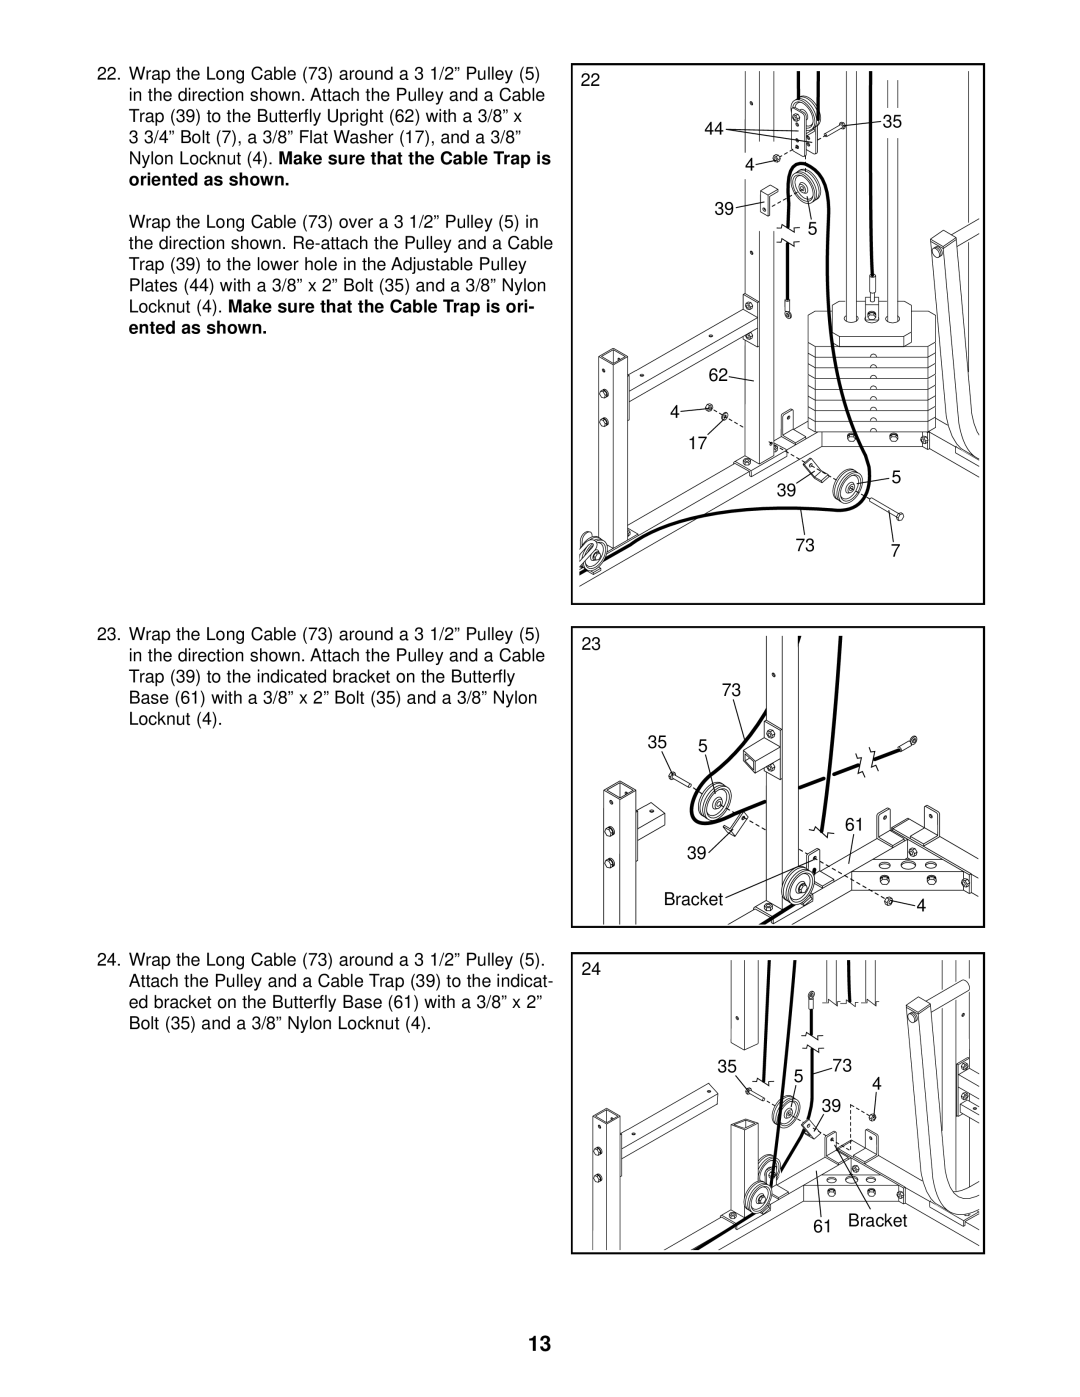 Weider WESY99300 user manual Nylon Locknut 4. Make sure that the Cable Trap is oriented as shown, Bracket 